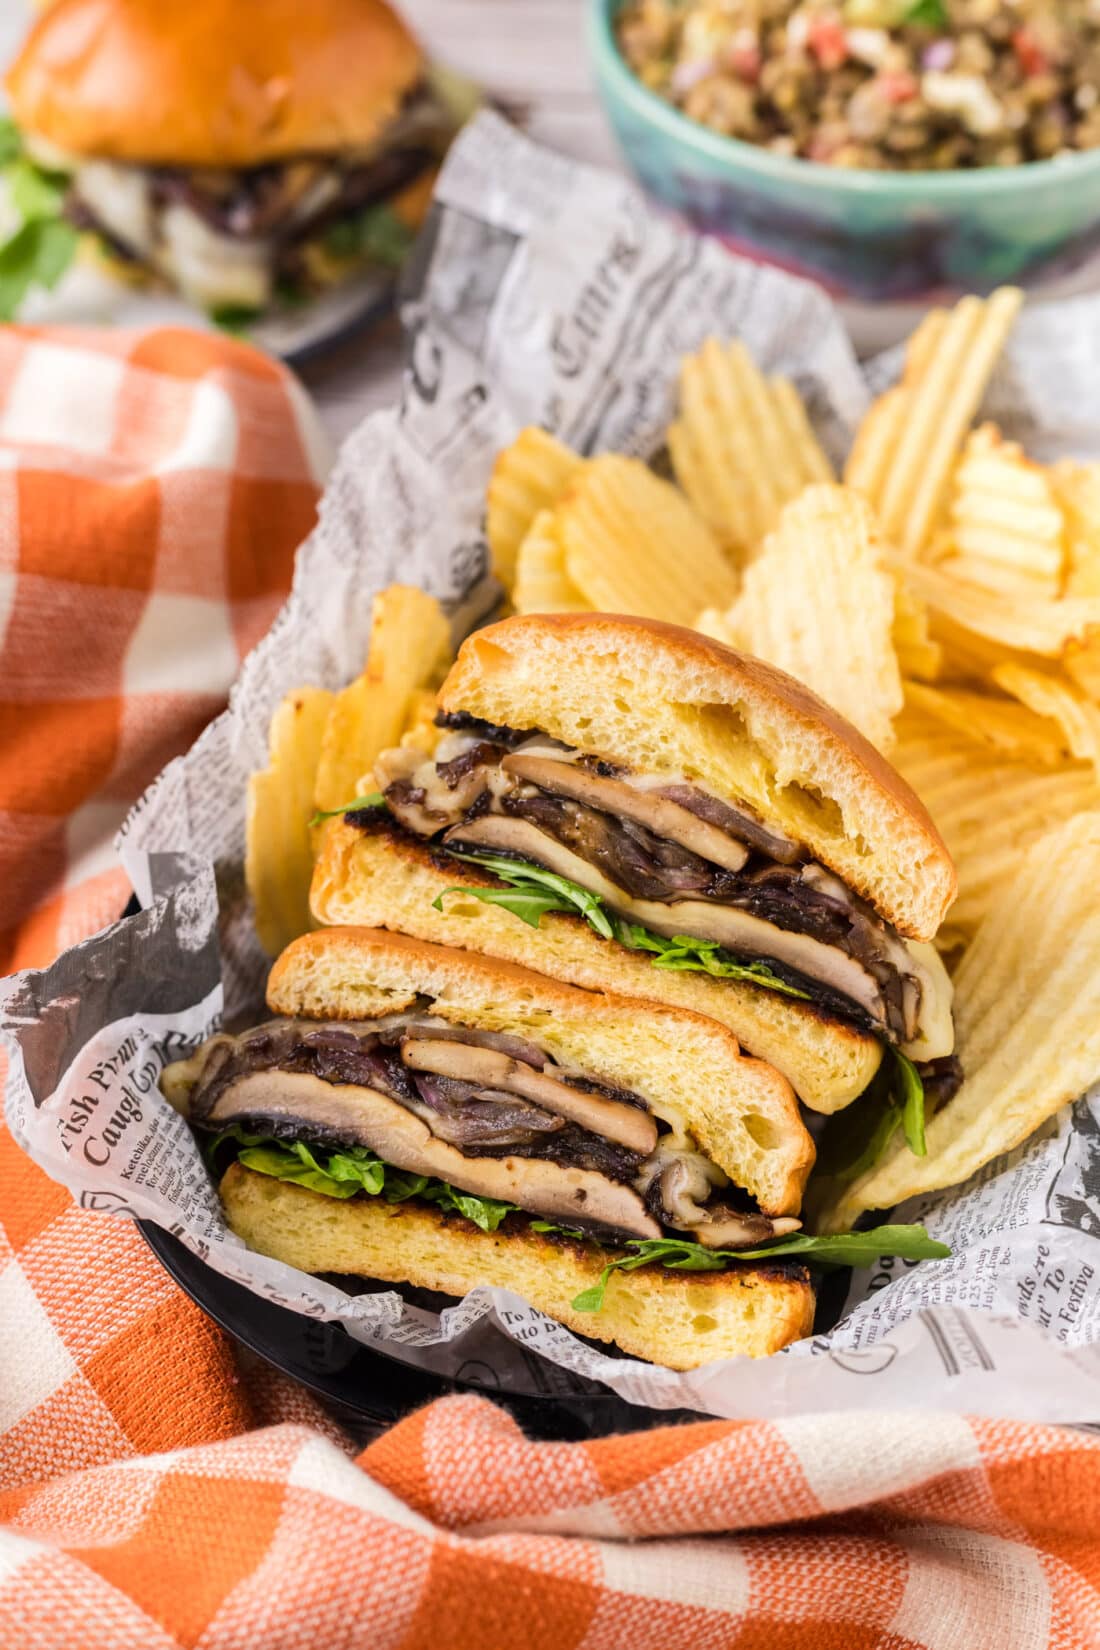 Mushroom Burger cut in half in a basket with chips